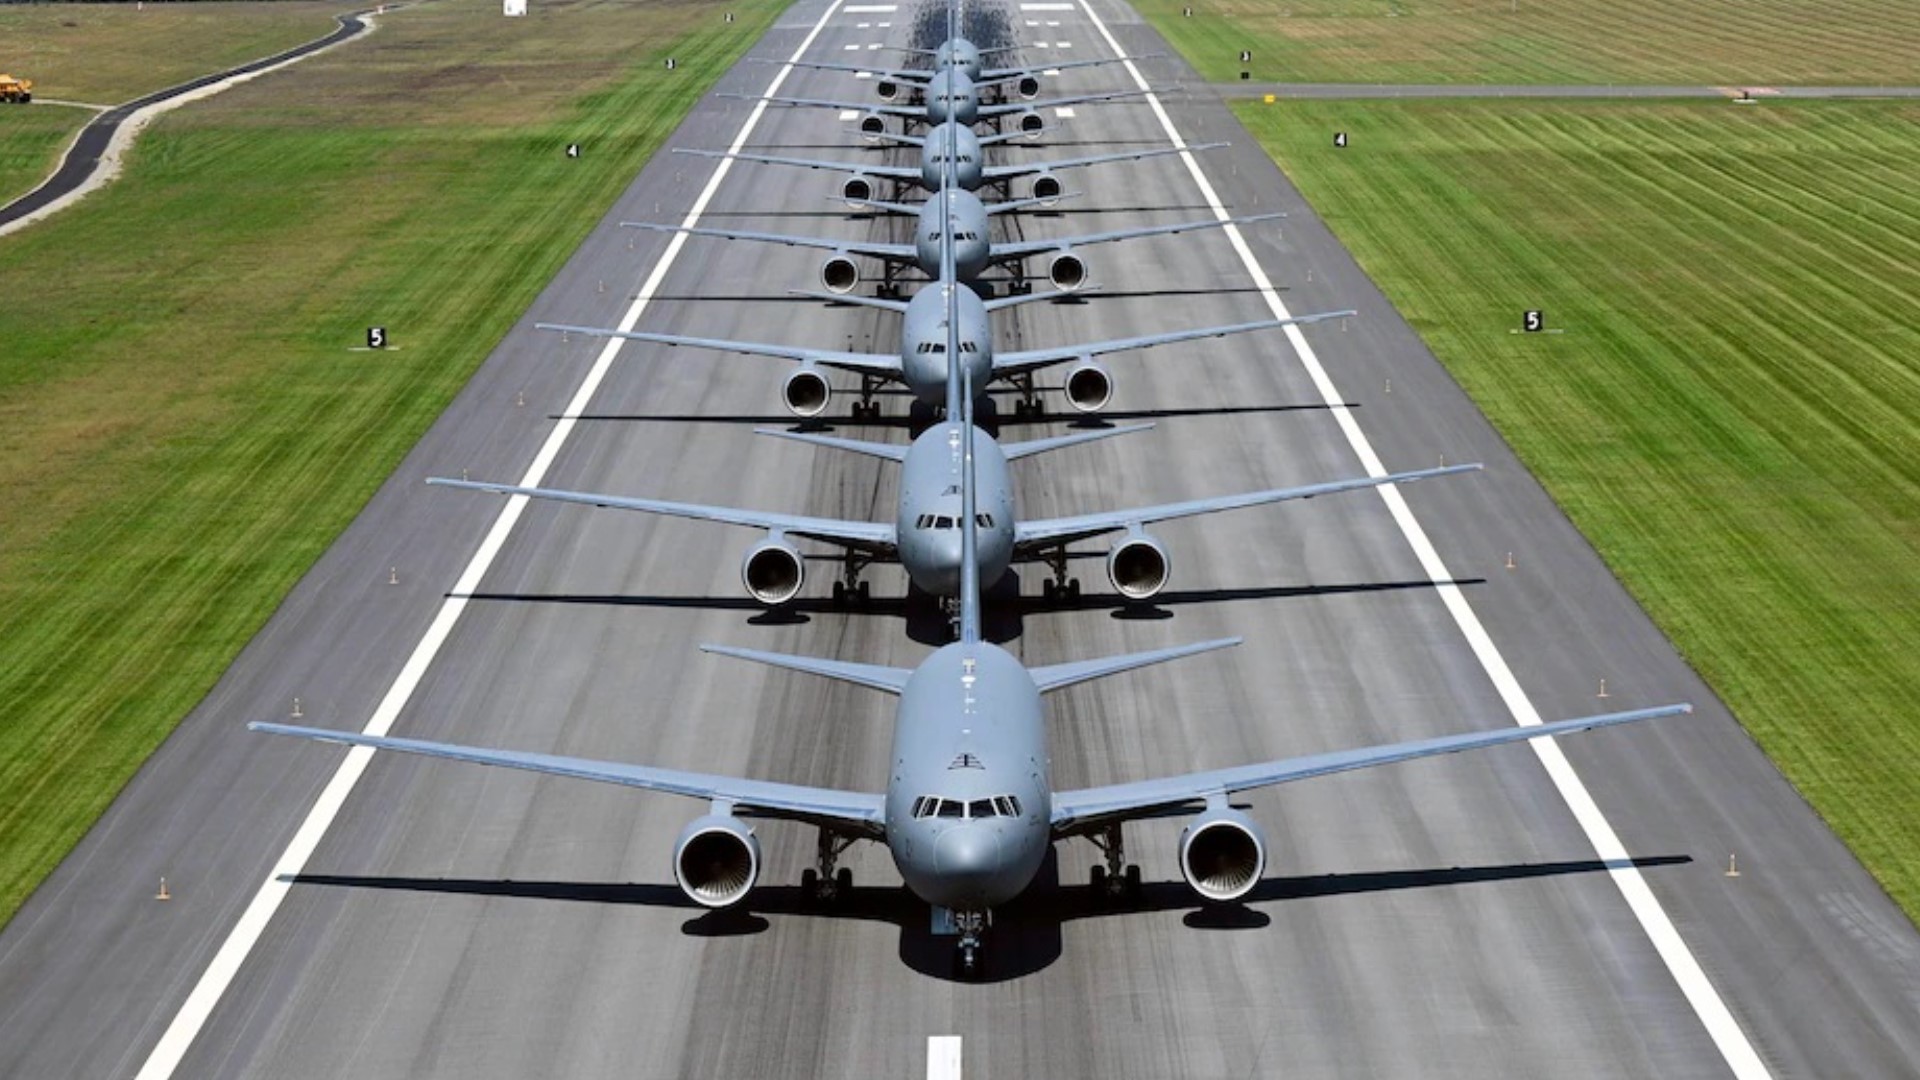 There will be 24 new modern tanker aircrafts at the main operating base in Tampa.